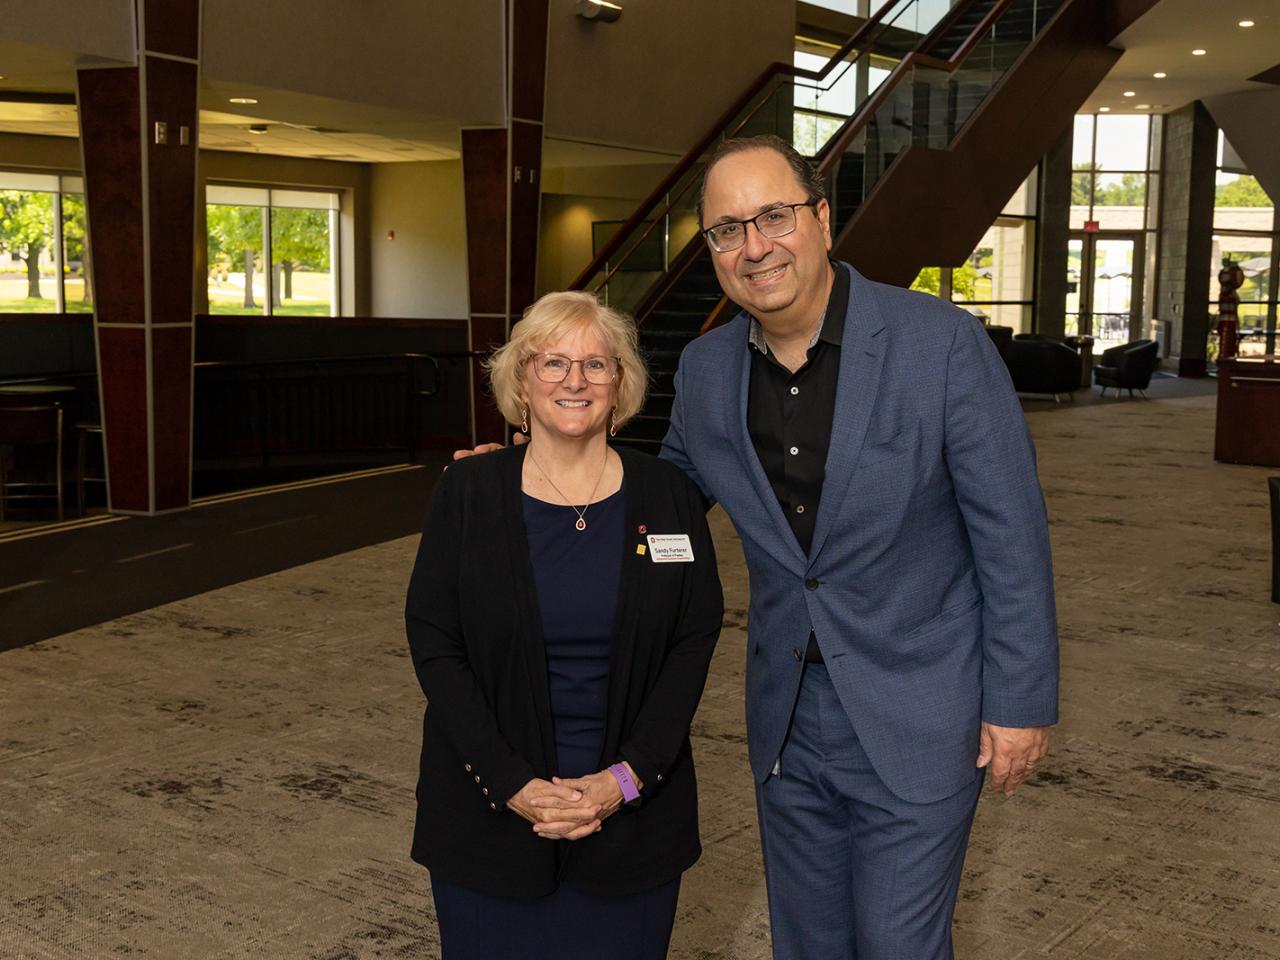 Portrait of Keyvan Esfarjani, Executive Vice President & Chief Global Operations officer at Intel Corporation with Sandy Furterer, Professor of Practice, Integrated Systems Engineering at The Ohio State University 